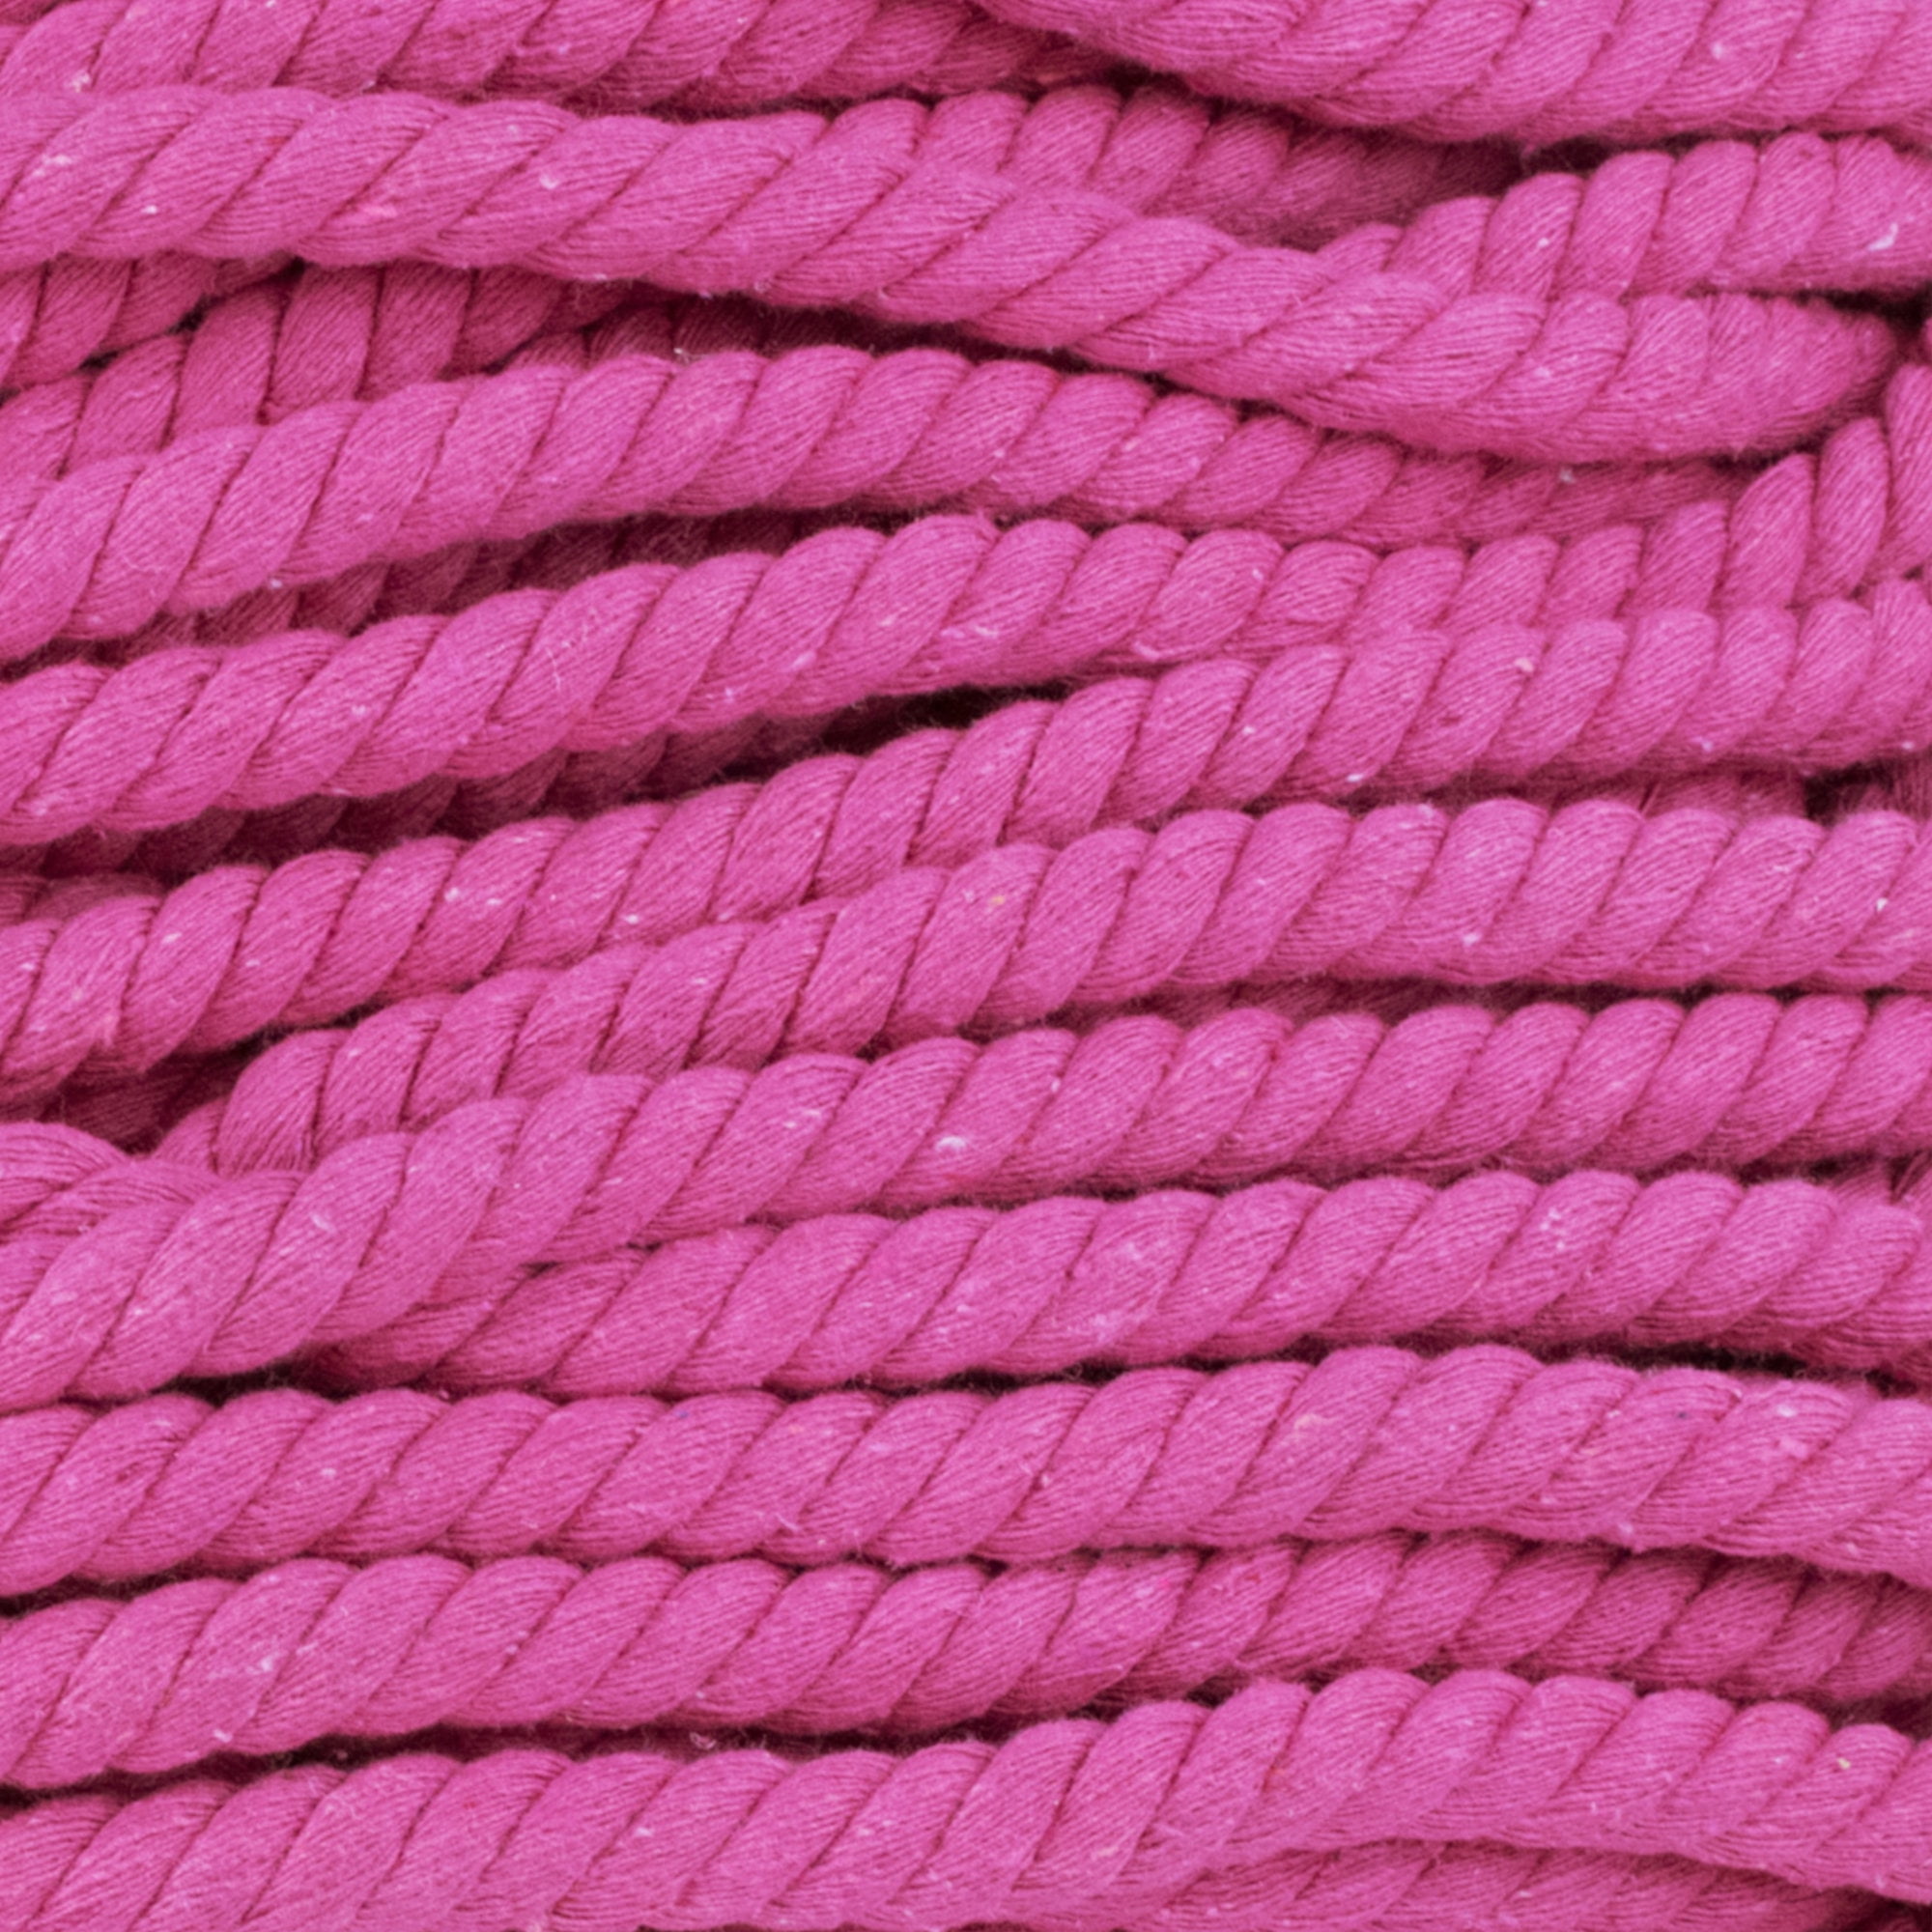 Natural Twisted Cotton Rope 1/2 Inch × 50 Feet Colorful Thick Rope for  Crafts, Rope Bowls, Hammock, Gardening Applications